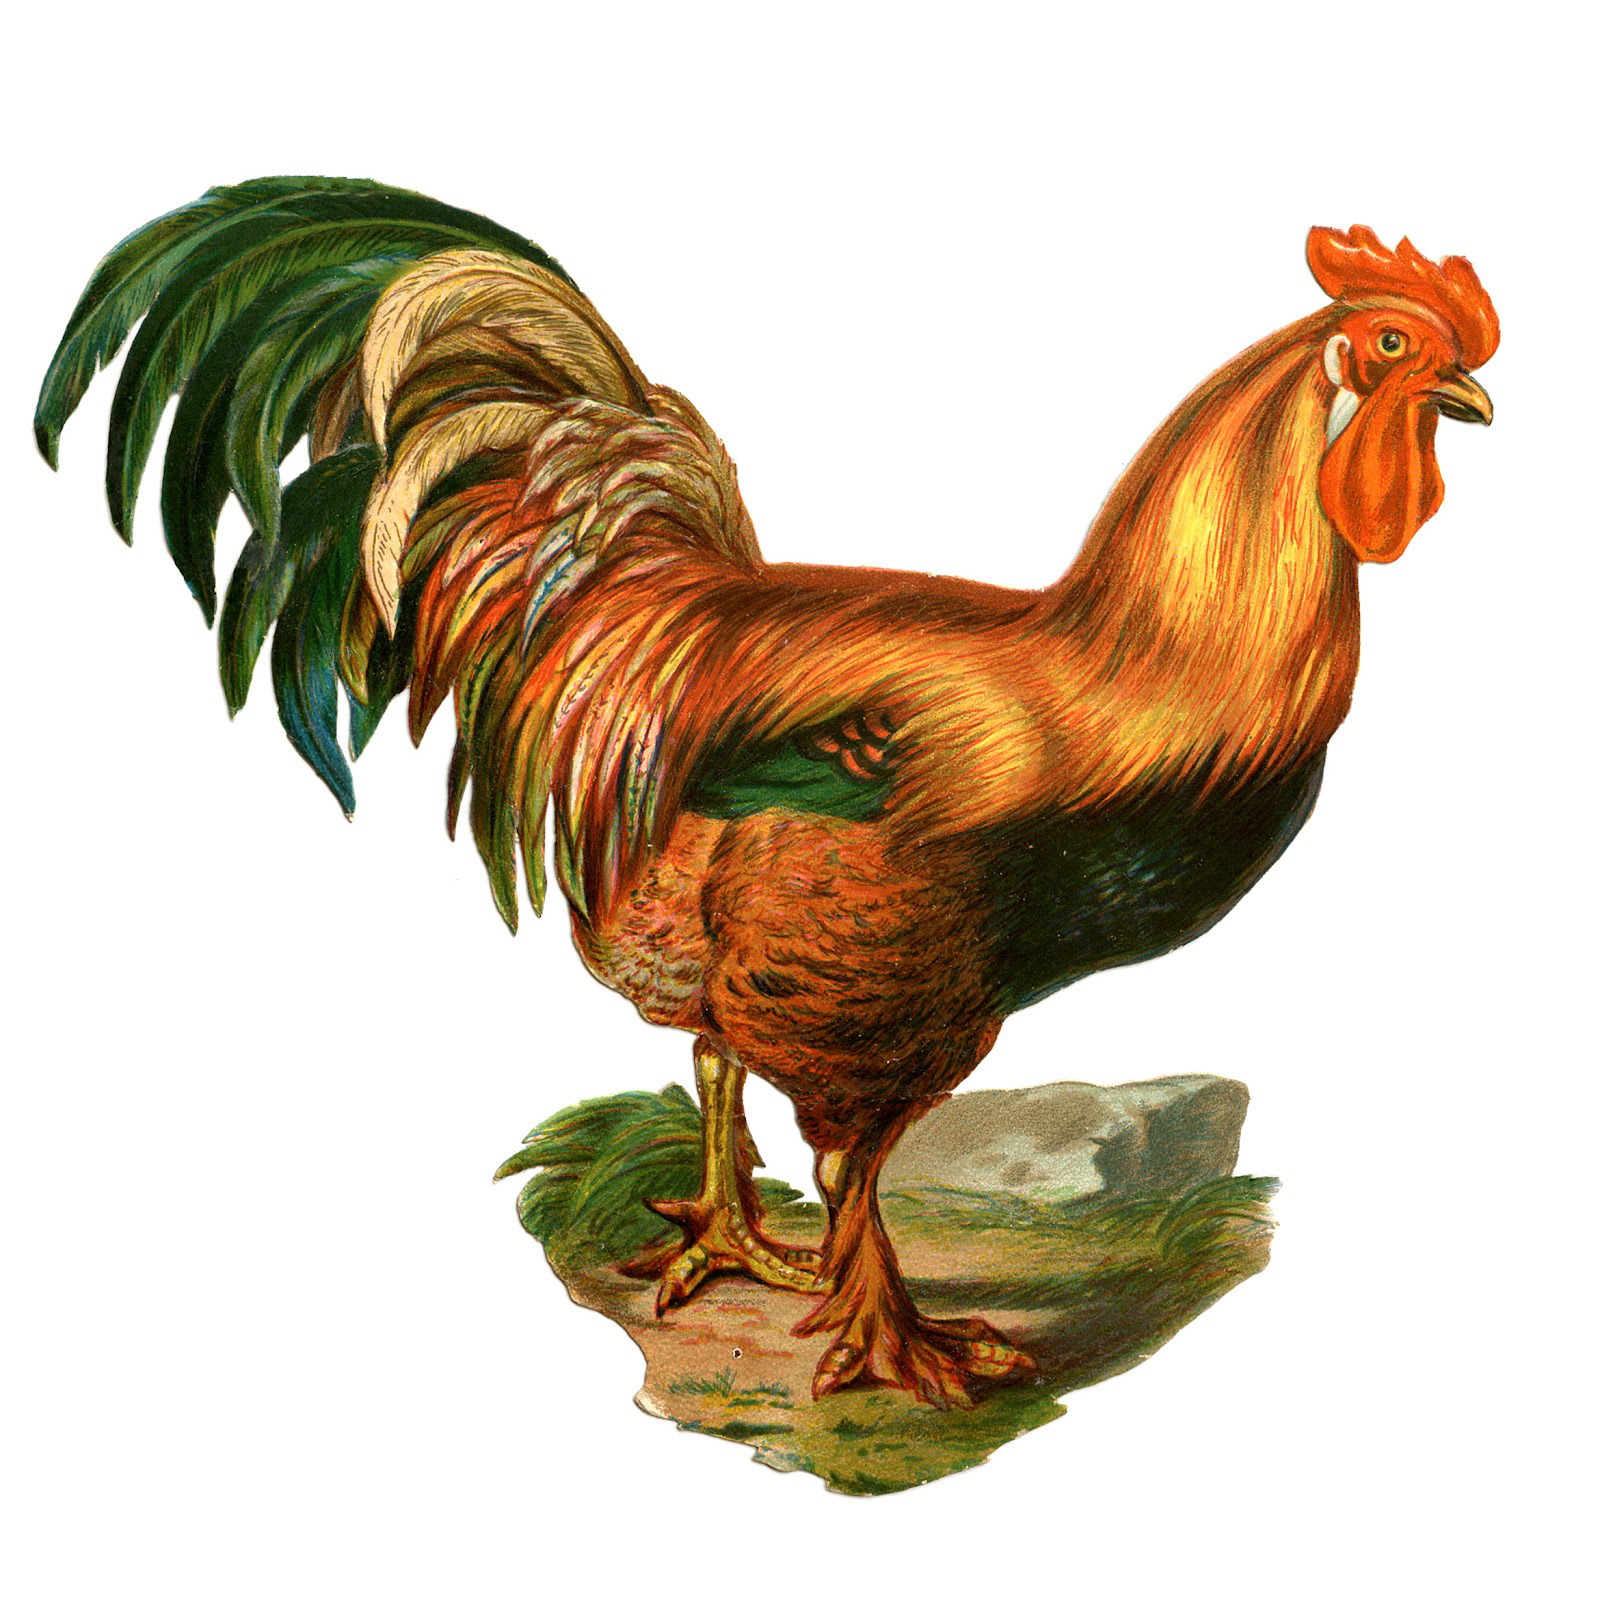 Rooster Image in Color